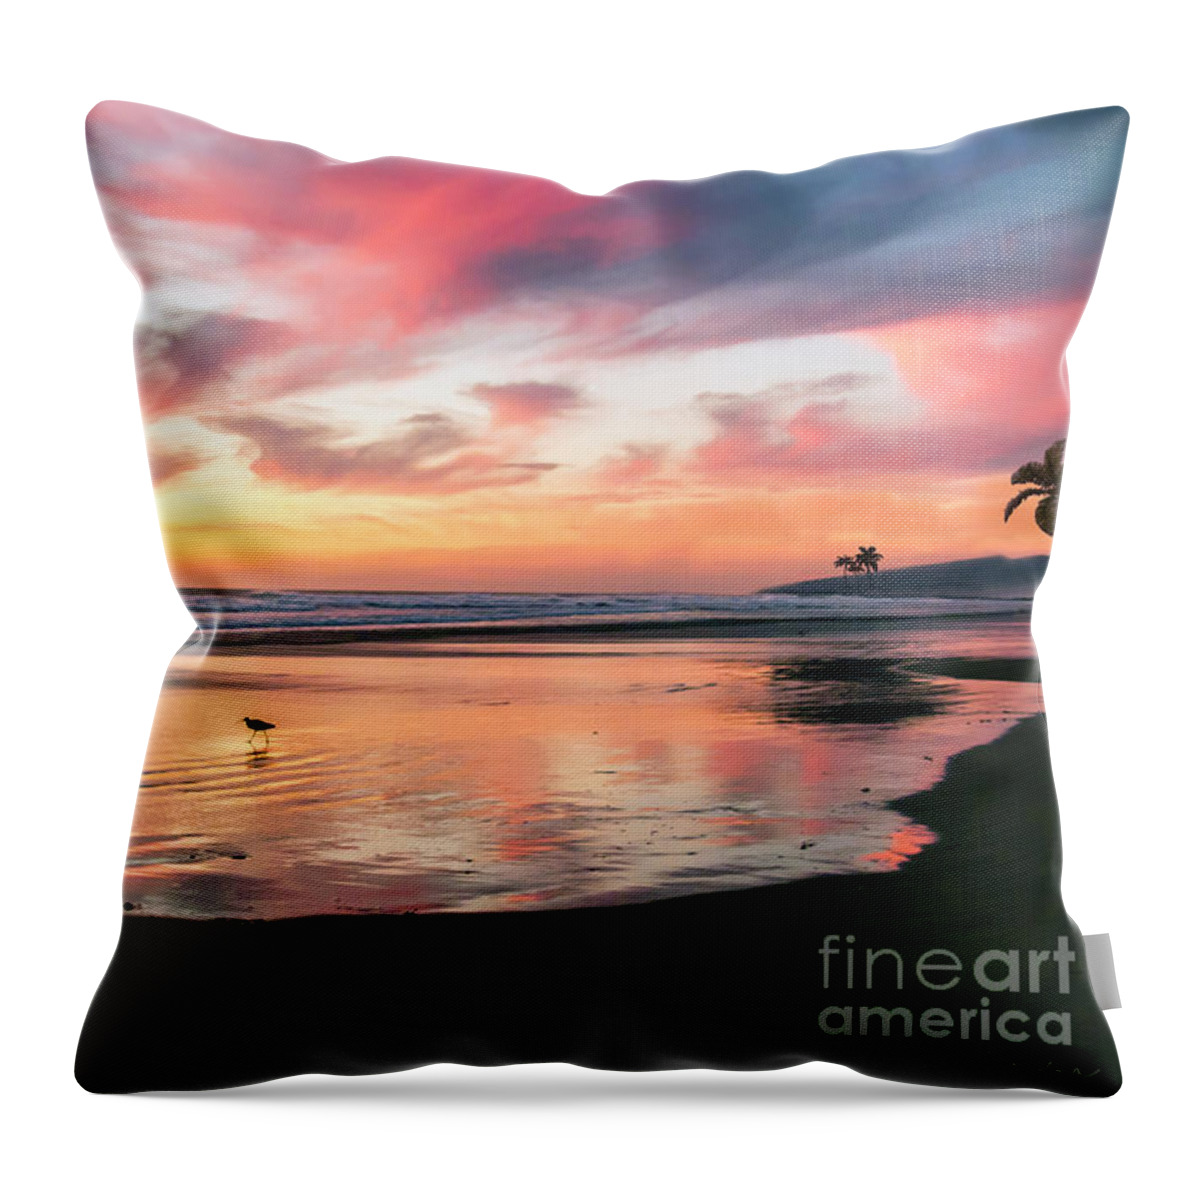 Seascape Sunrises Throw Pillow featuring the photograph Tropical Sunrise Morning Bliss Seascape C8 by Ricardos Creations